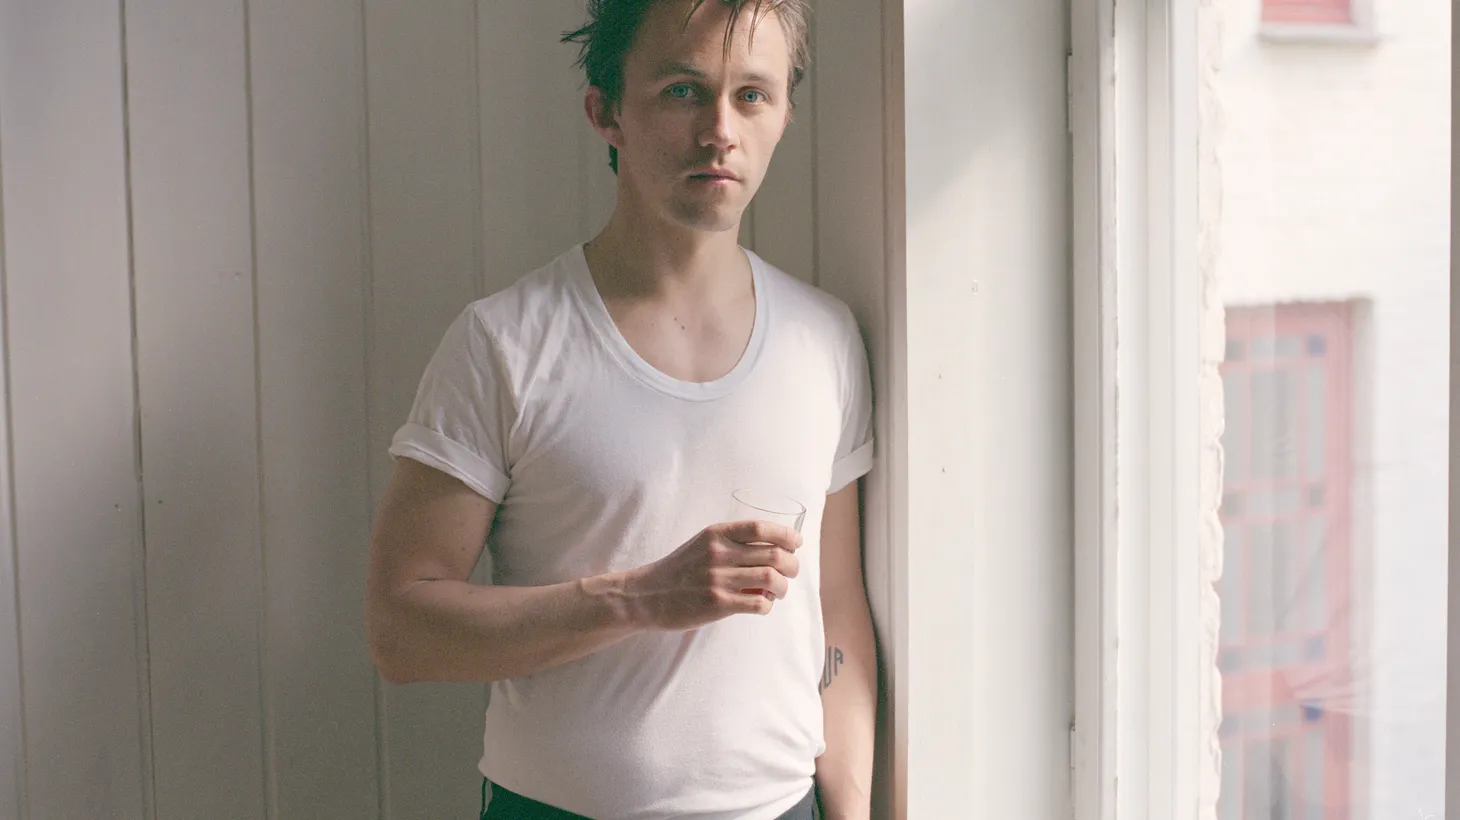 Norwegian-born singer-songwriter Sondre Lerche lets off steam about love on his excellent new album and will treat Morning Becomes Eclectic listeners to live versions.